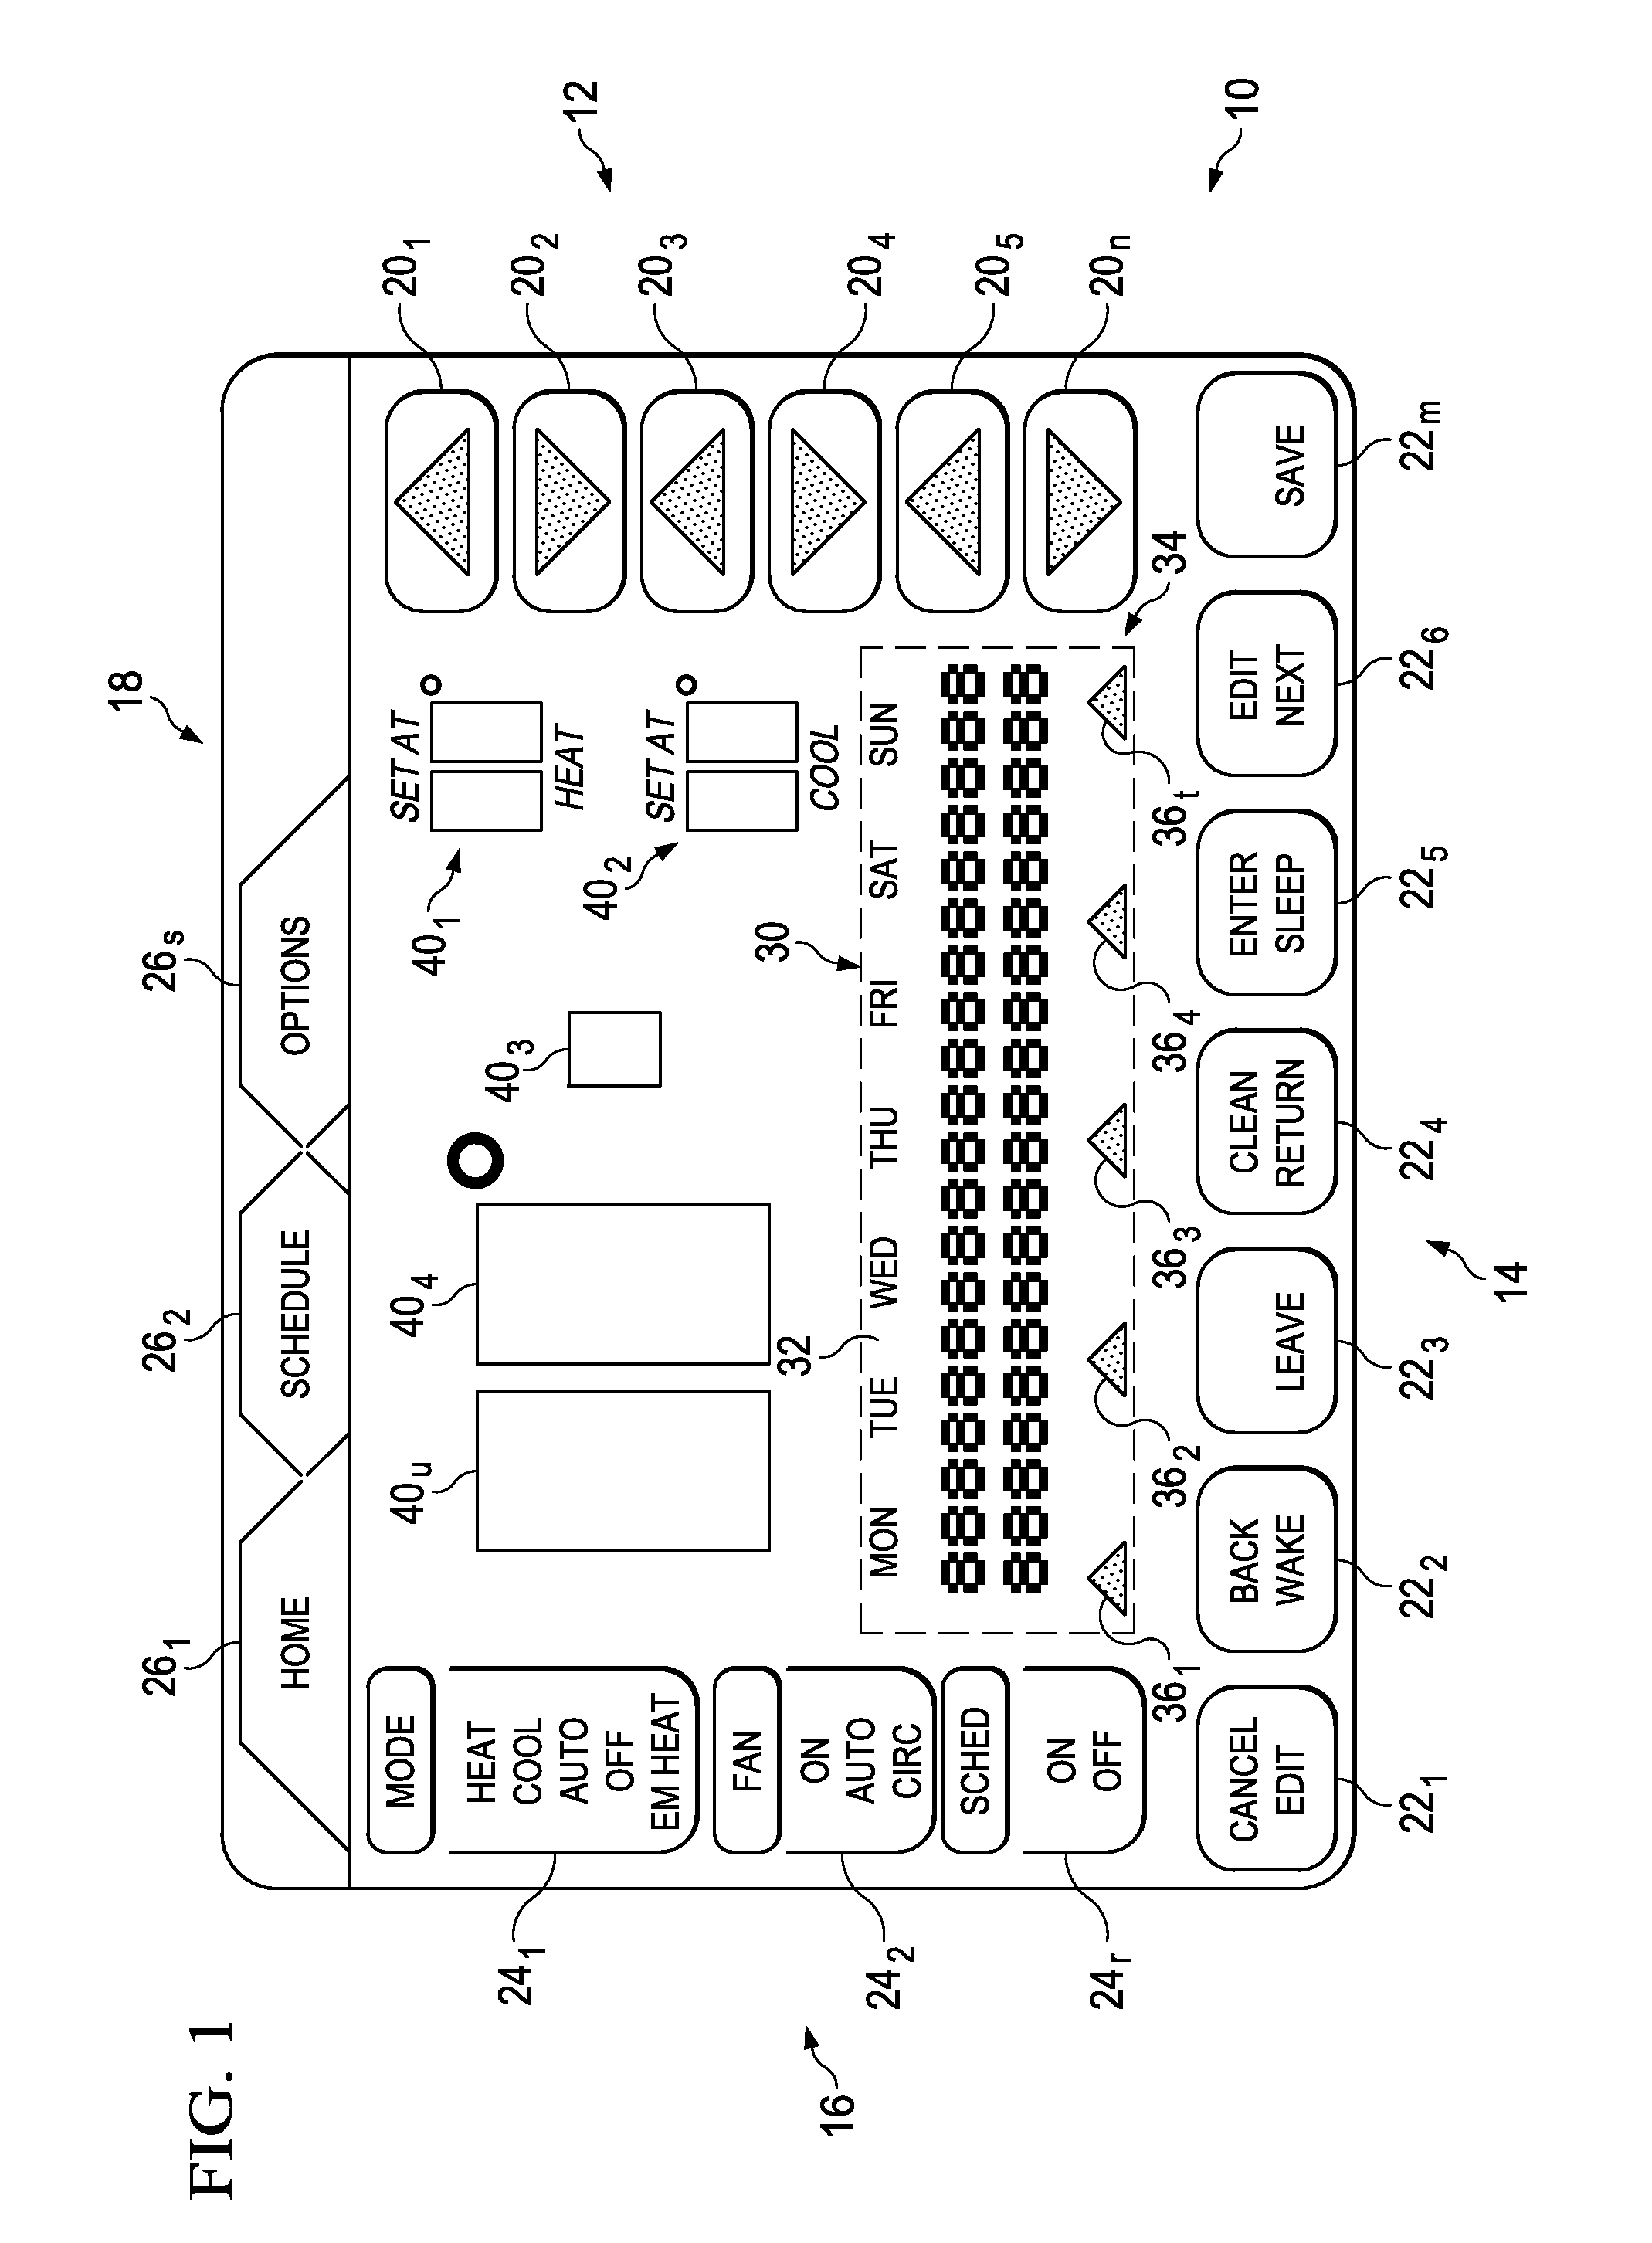 Display apparatus and method having menu and system setting scroll capability for an environmental control system